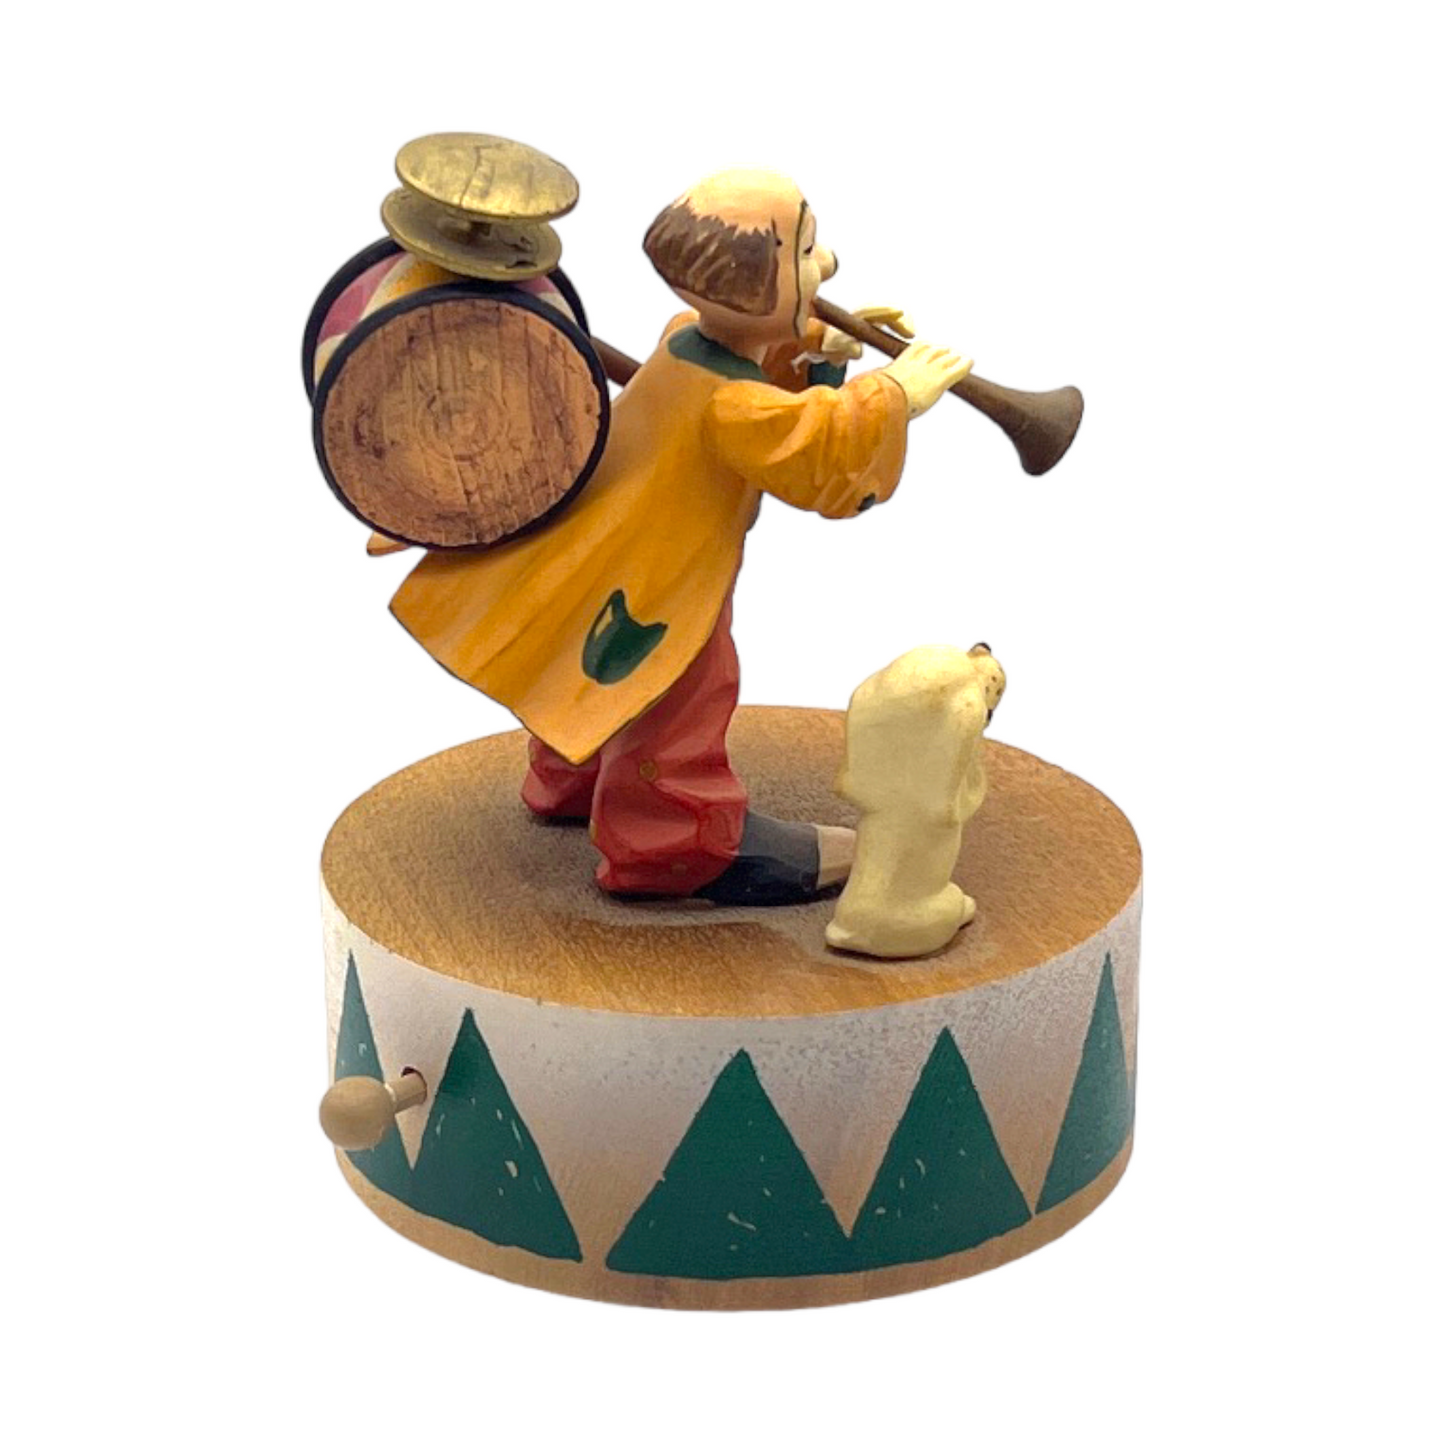 ANRI Woodcarving - Music Box - Send in The Clowns - 5"